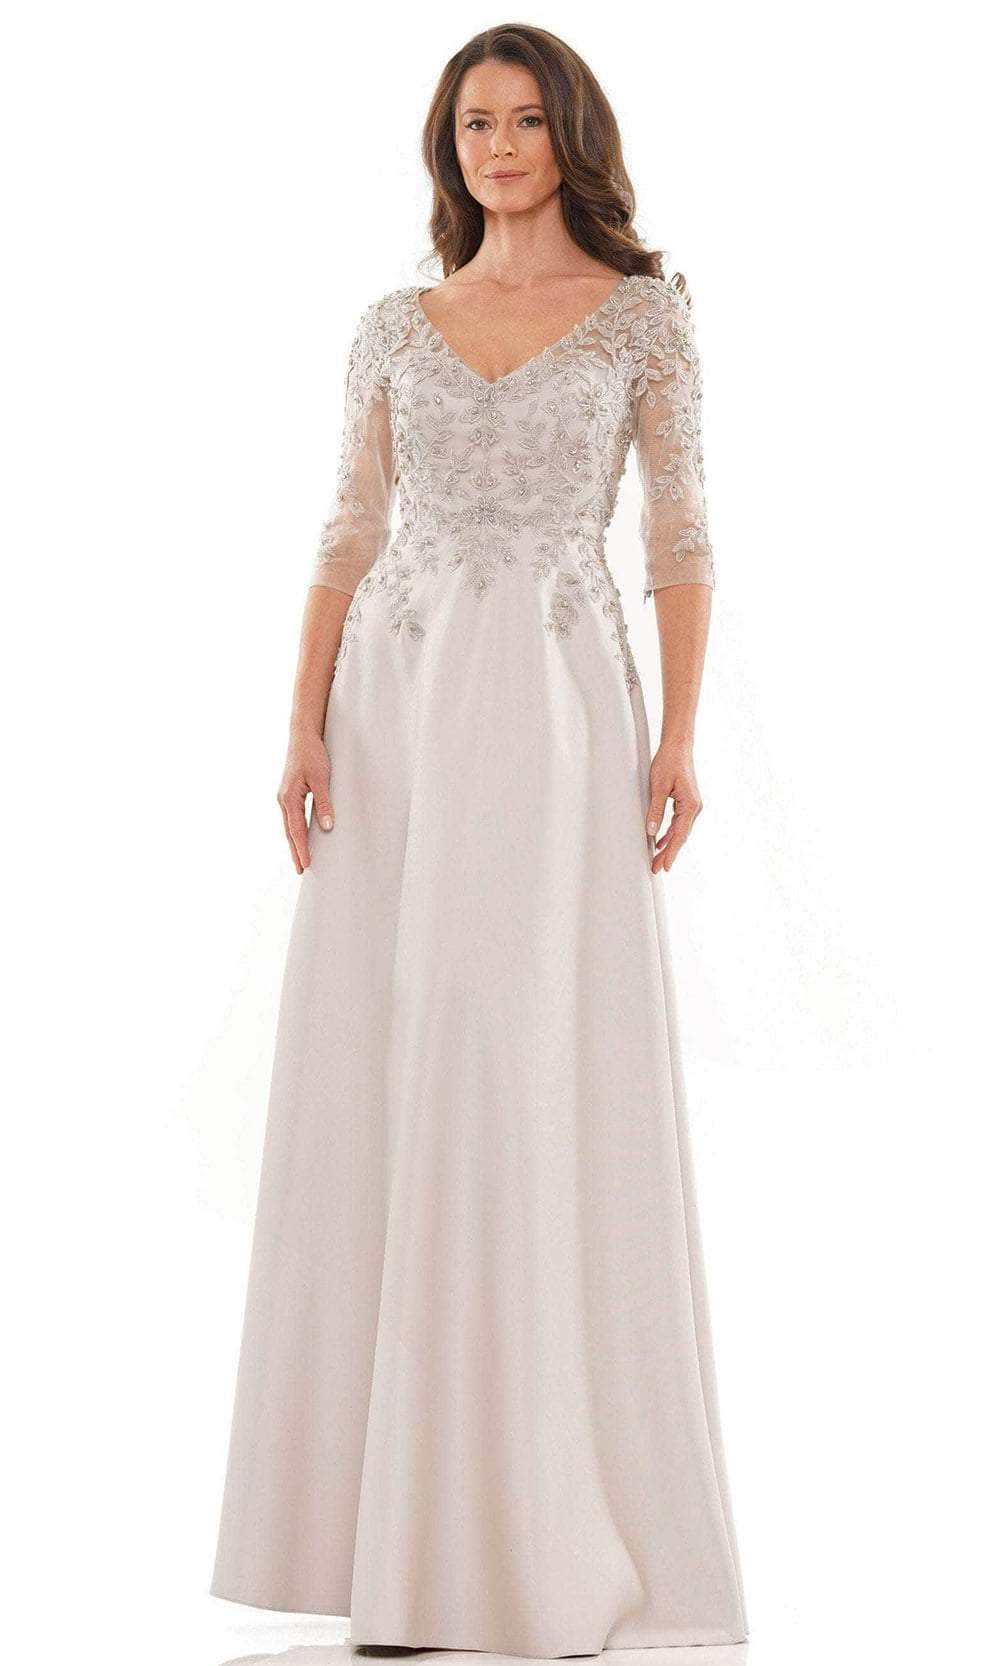 Marsoni by Colors MV1174 - Beaded Applique V-Neck Formal Gown
